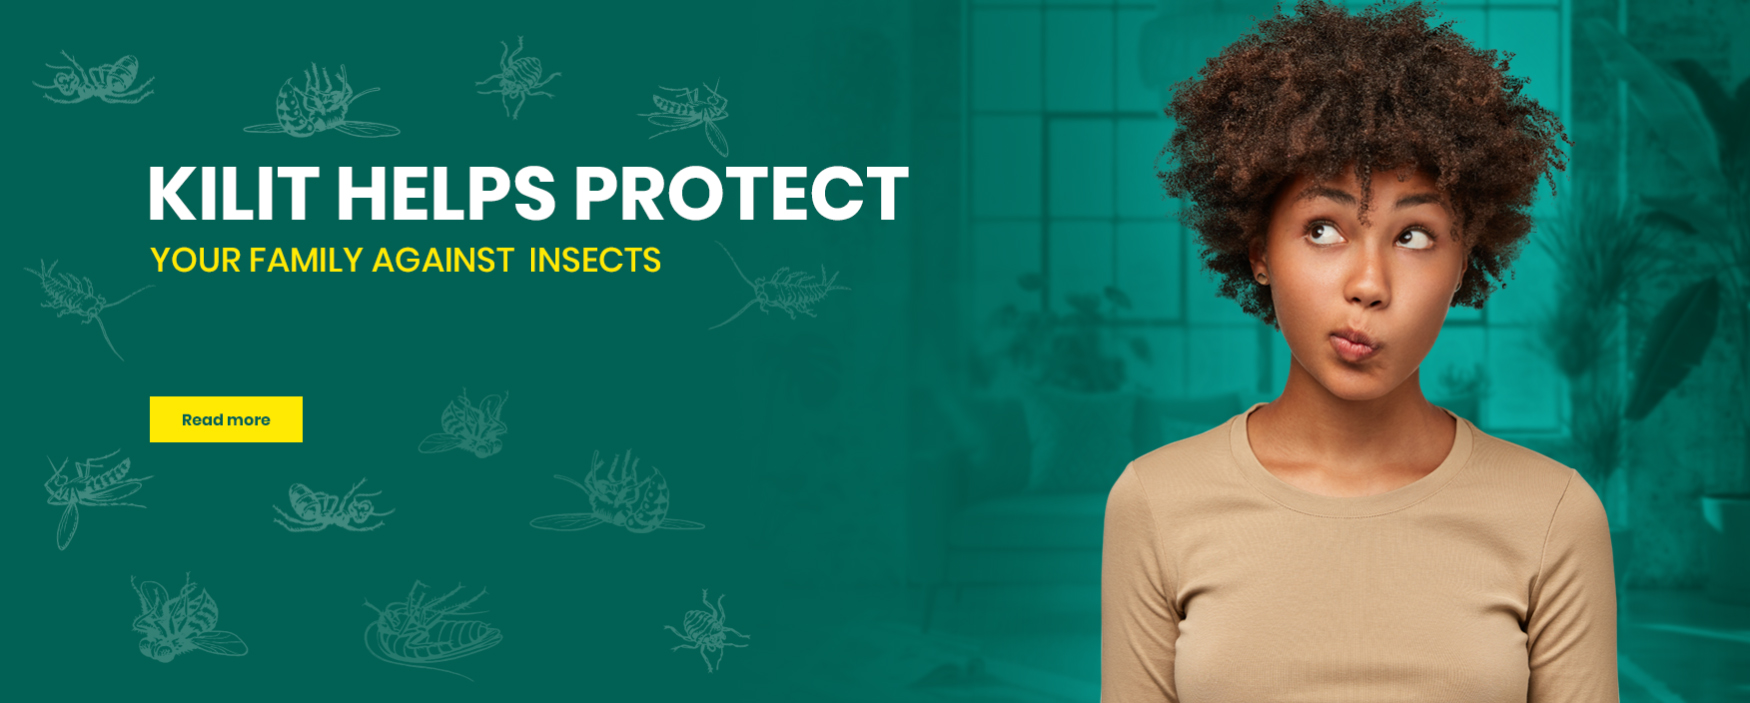 Kilit helps protect your family againts insects